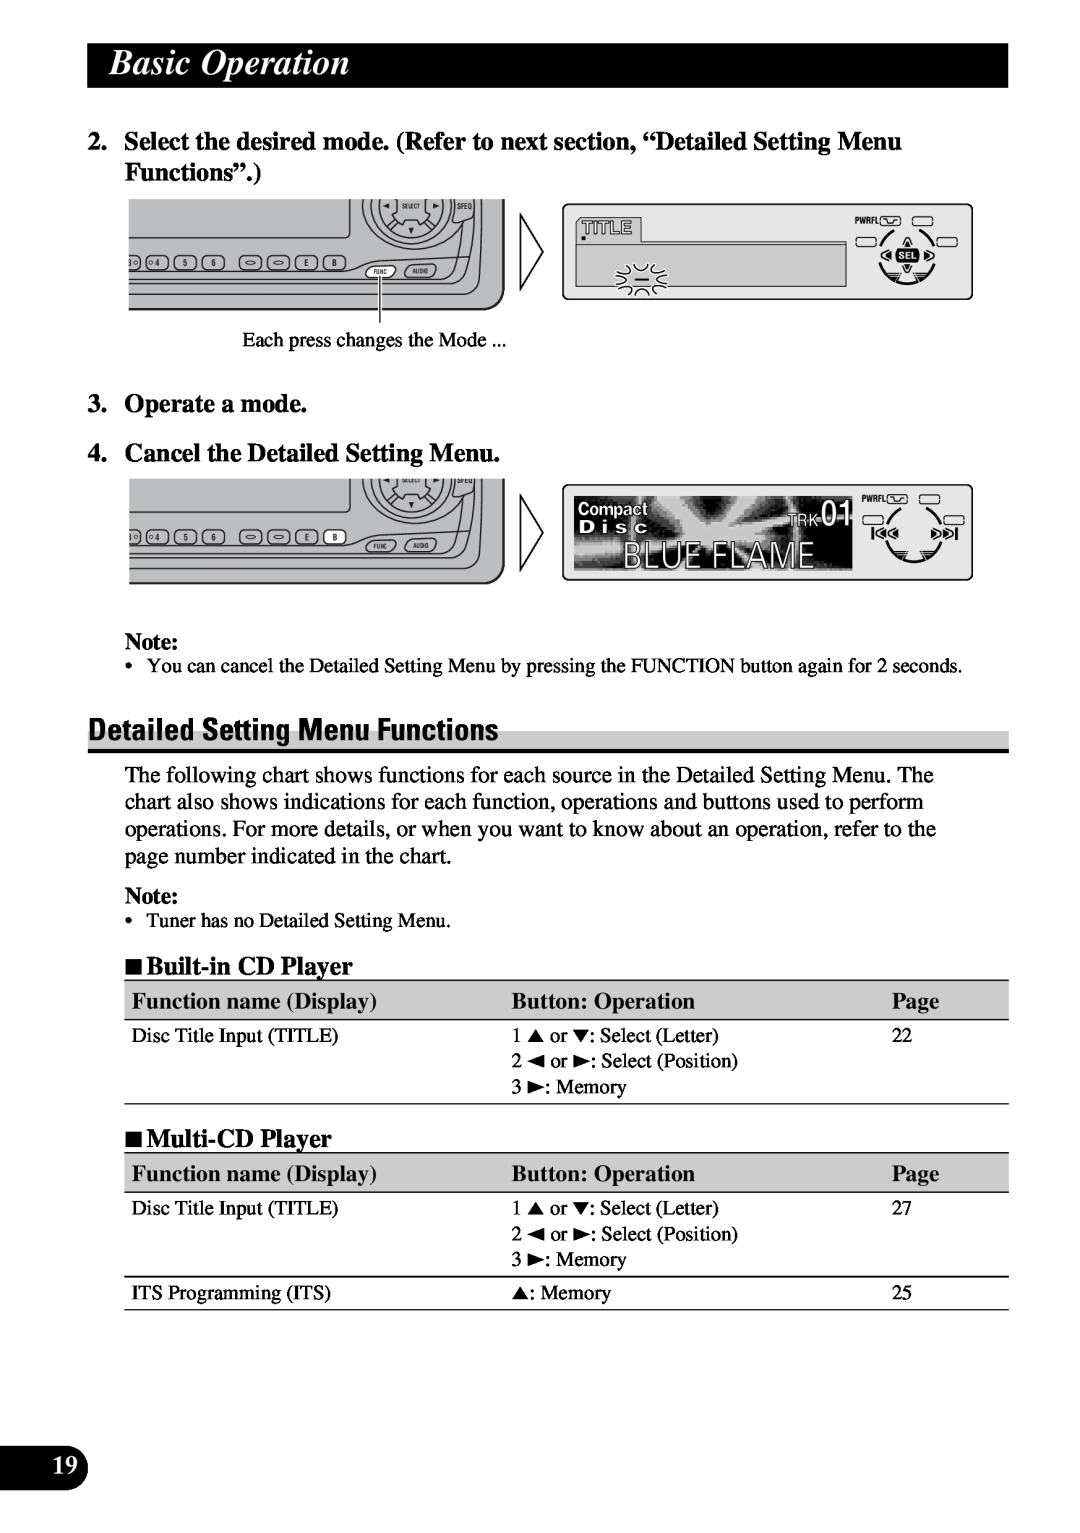 Pioneer DEH-P6300, DEH-P7300 Detailed Setting Menu Functions, Operate a mode 4. Cancel the Detailed Setting Menu, Page 